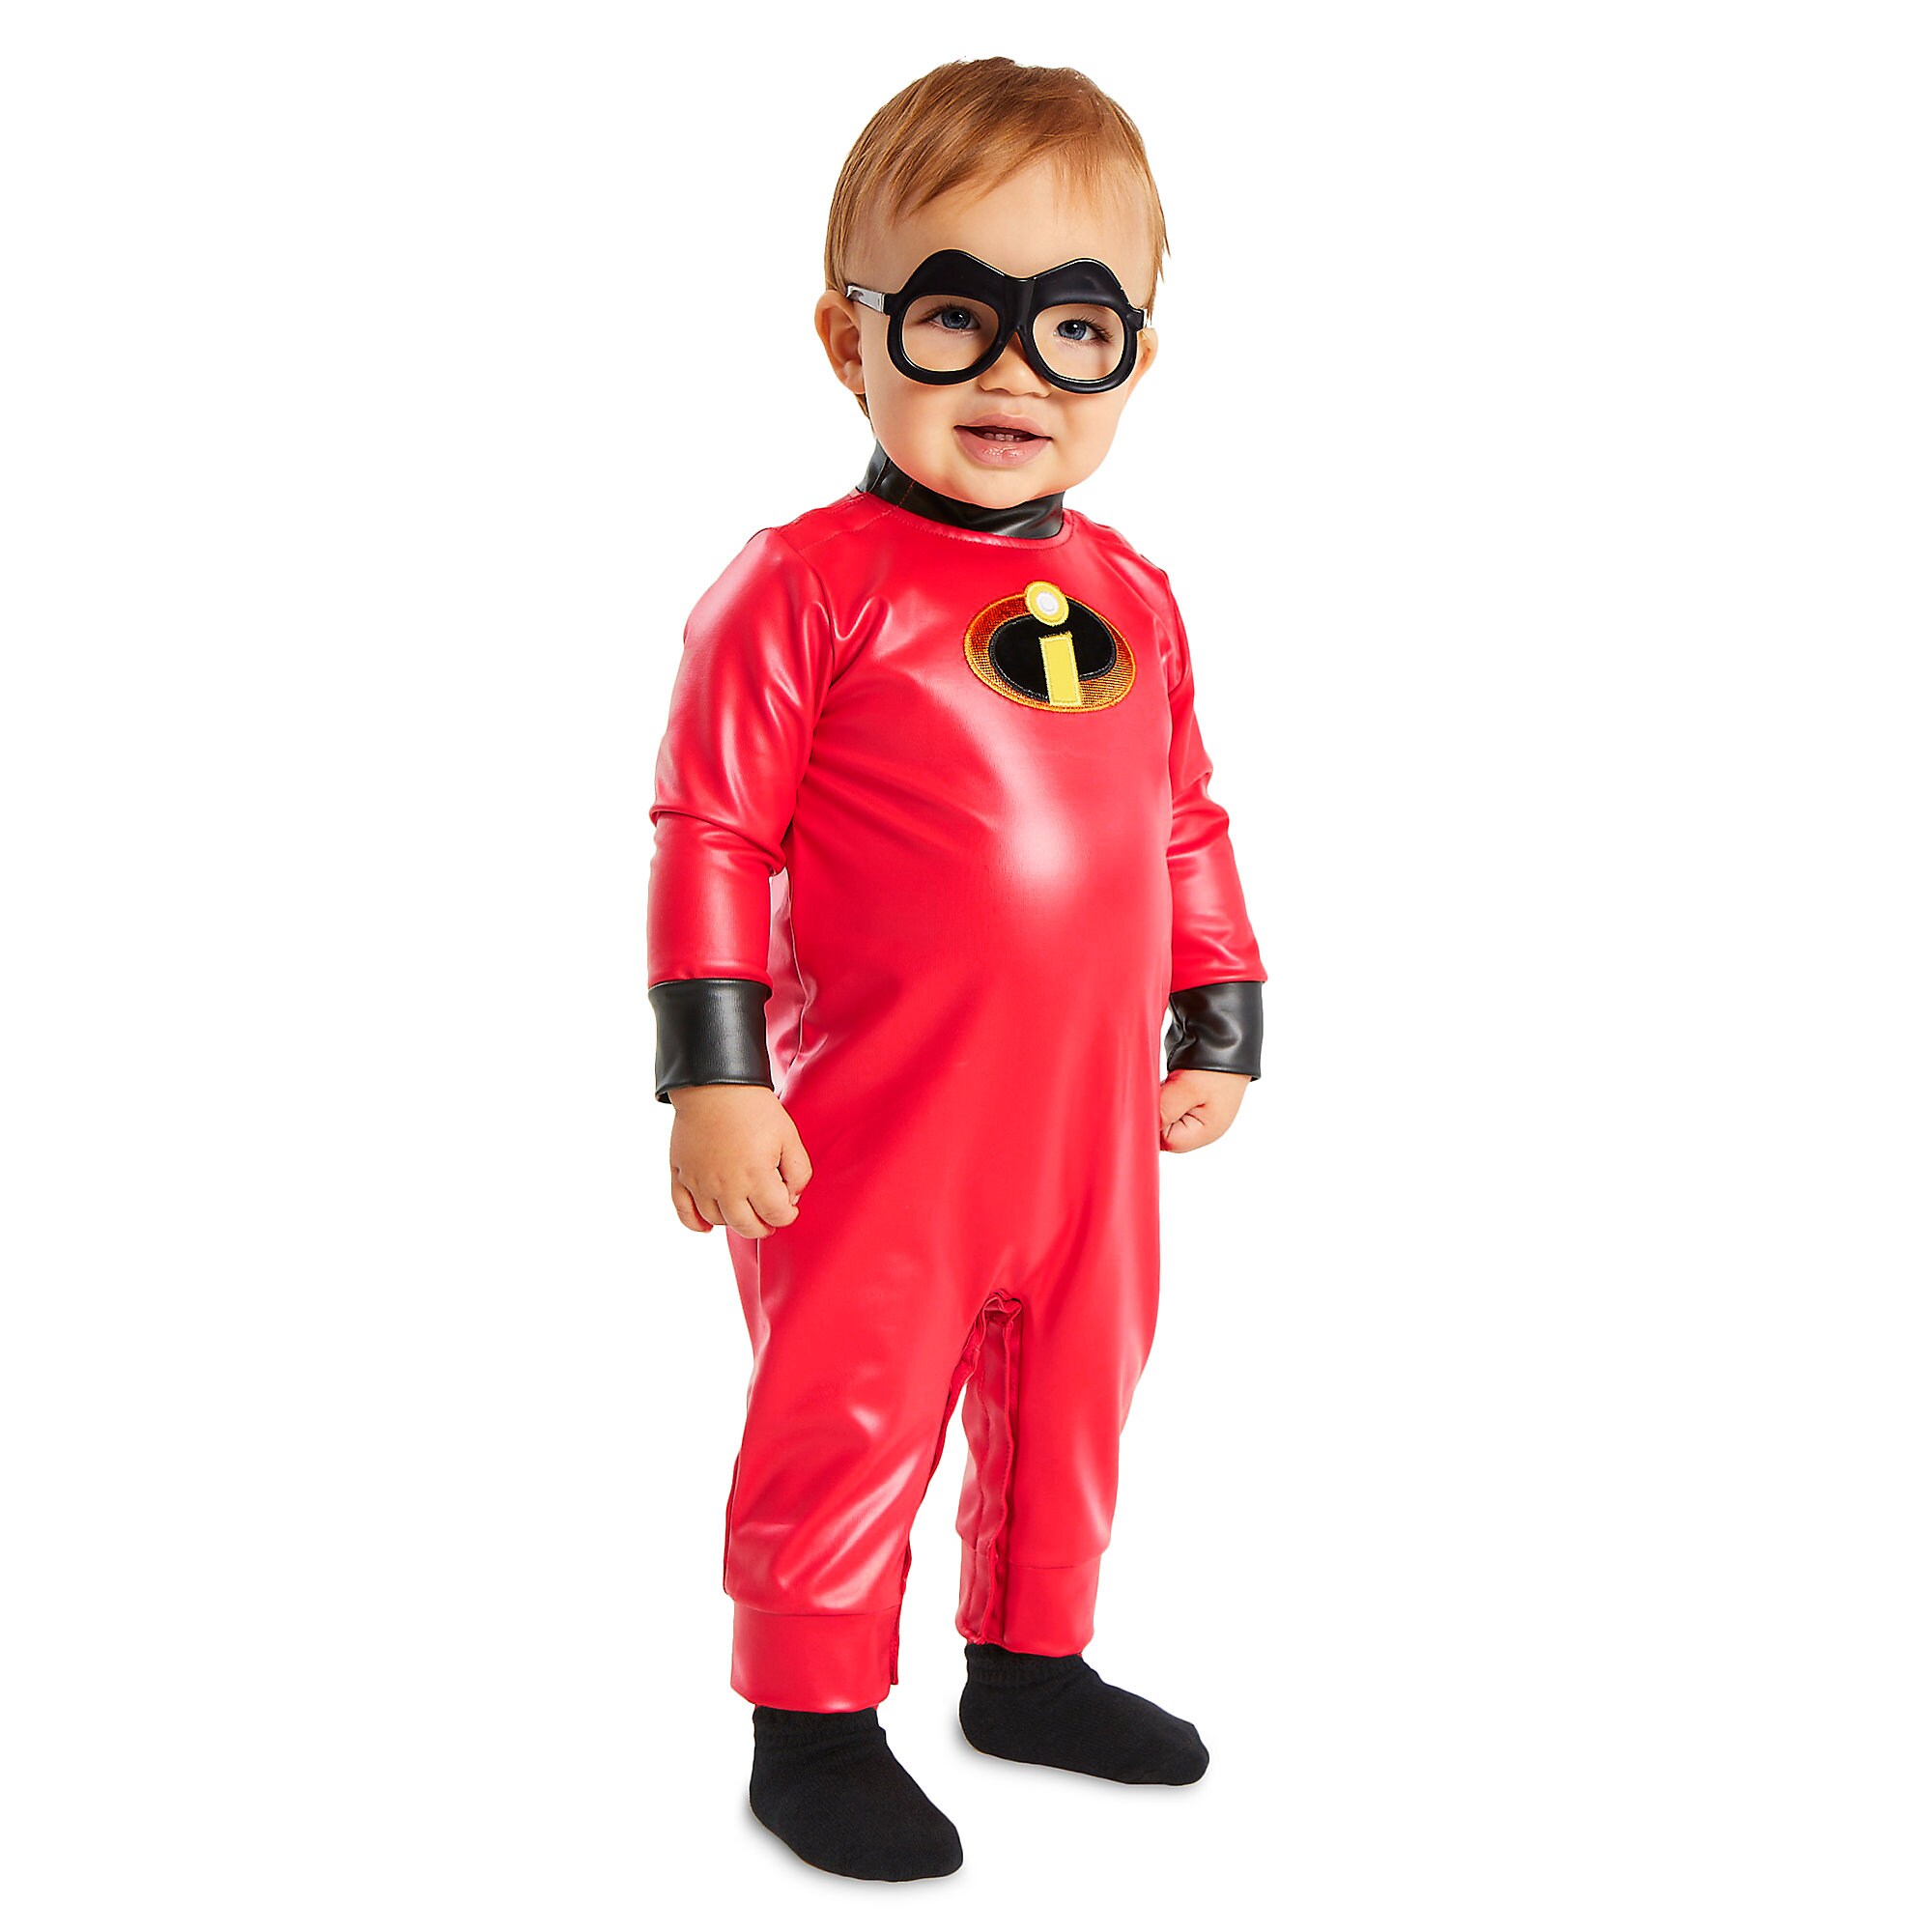 Jack-Jack Costume for Baby - Incredibles 2